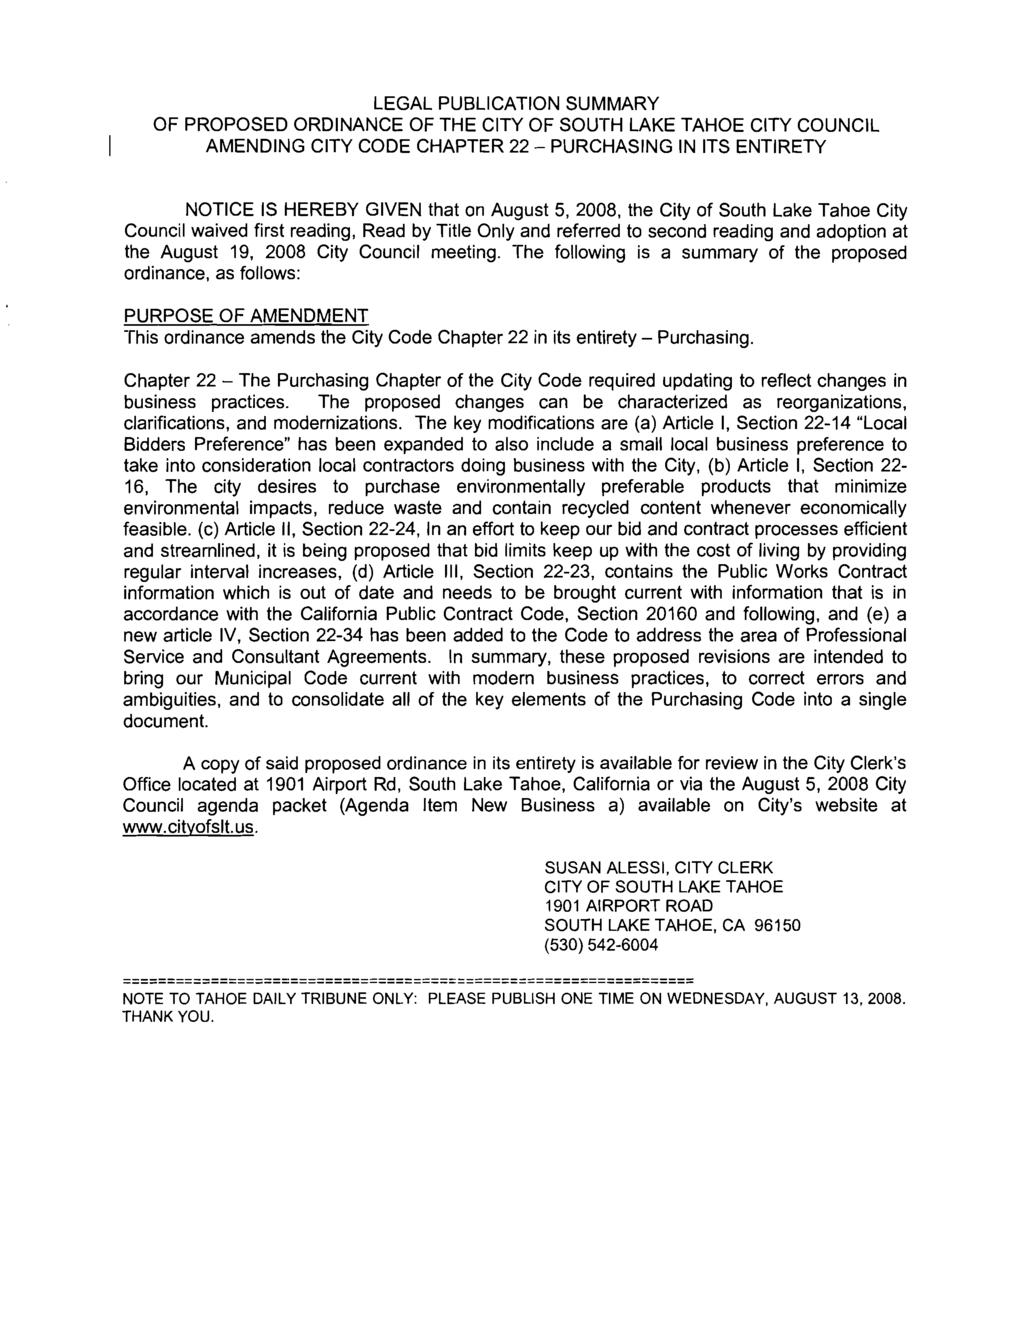 LEGAL PUBLICATION SUMMARY OF PROPOSED ORDINANCE OF THE CITY OF SOUTH LAKE TAHOE CITY COUNCIL AMENDING CITY CODE CHAPTER 22 - PURCHASING IN ITS ENTIRETY NOTICE IS HEREBY GIVEN that on August 5, 2008,